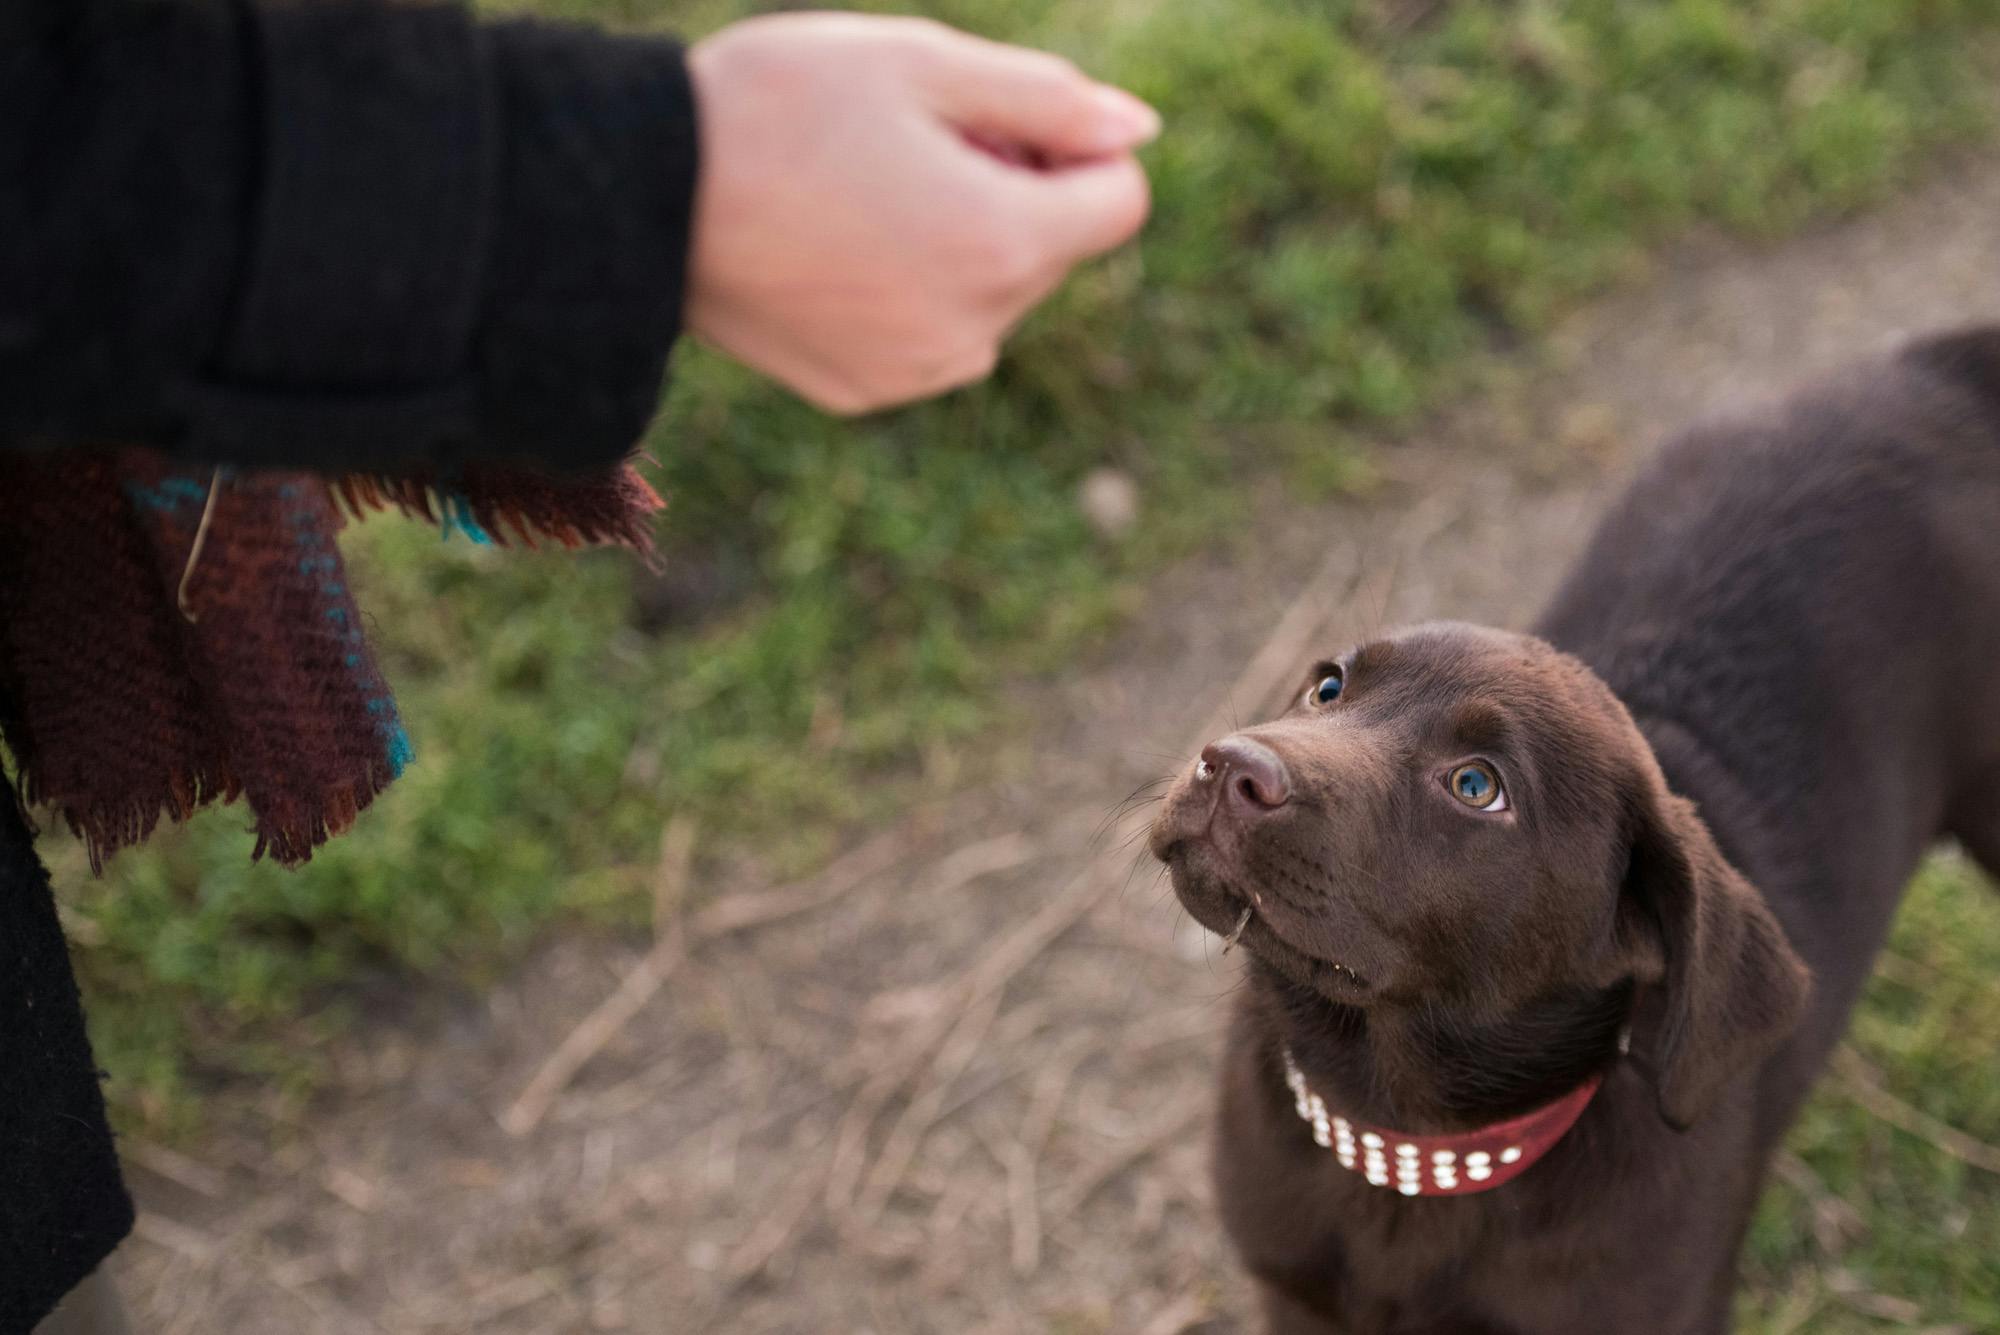 Chocolate lab looks up at closed hand while outside on a walking path